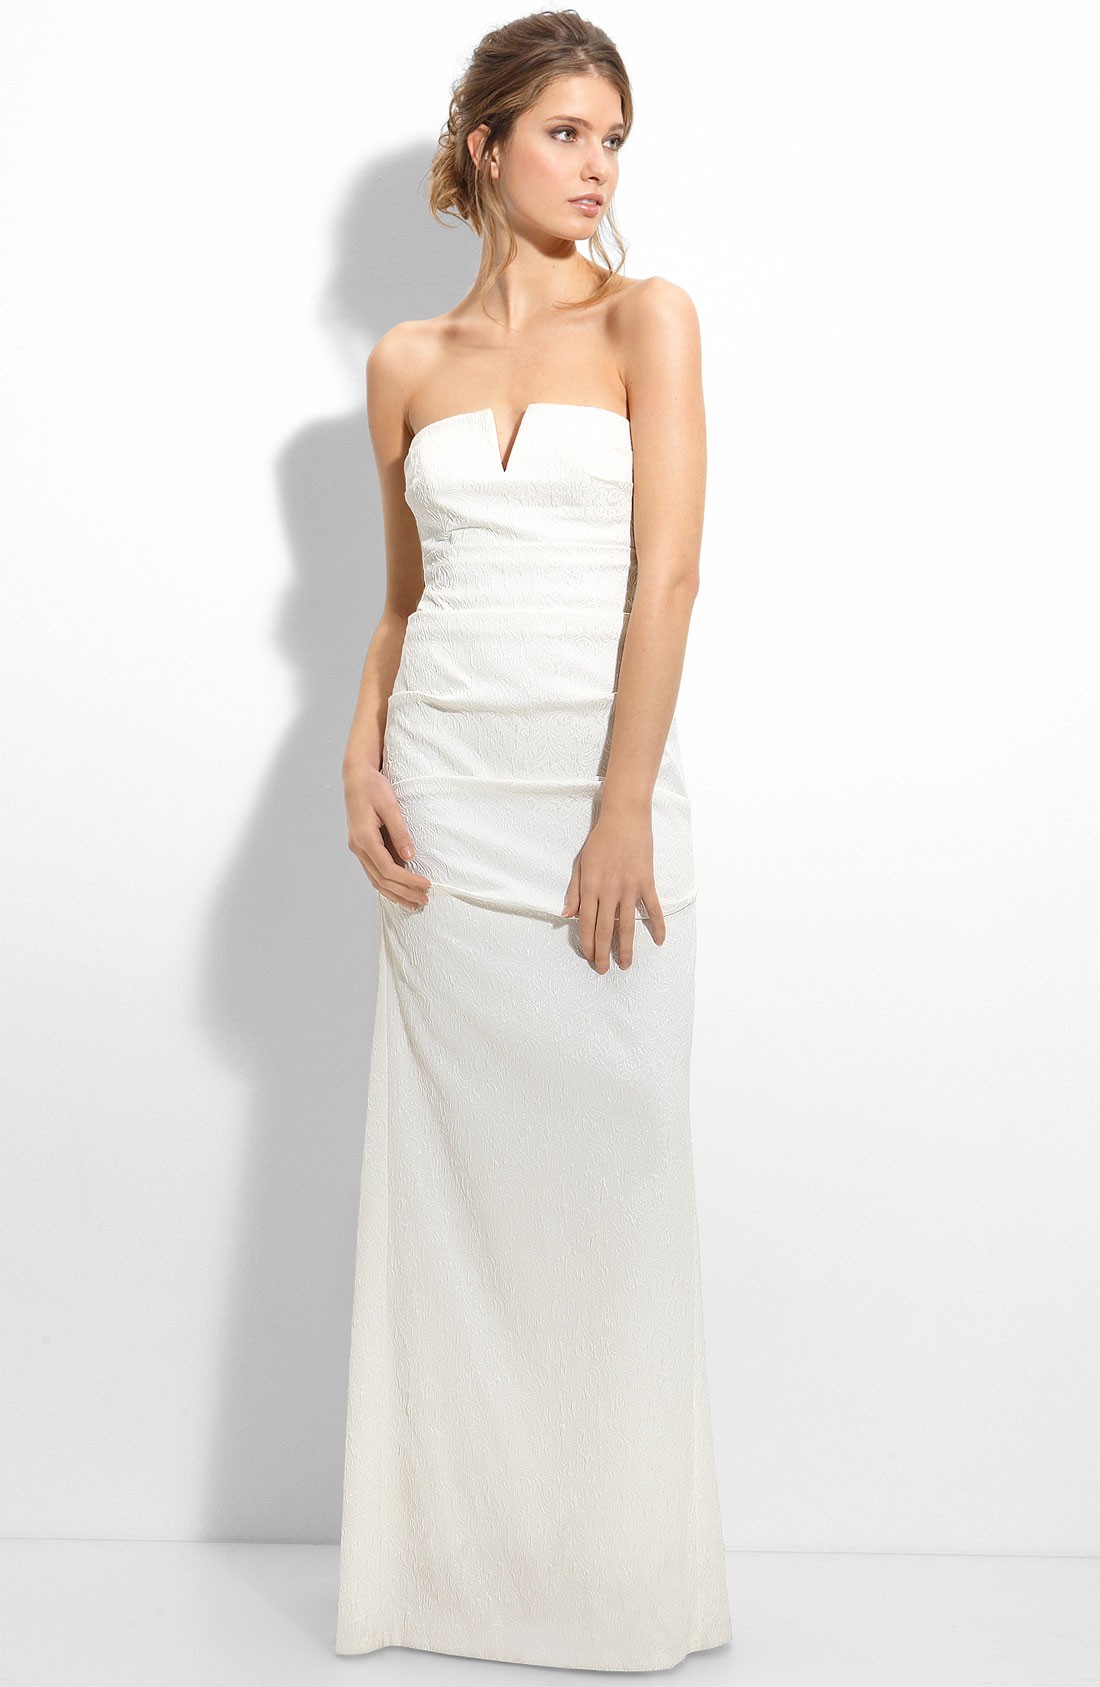 Nicole Miller Pintucked Jacquard Fishtail Gown New Wedding Dress ...